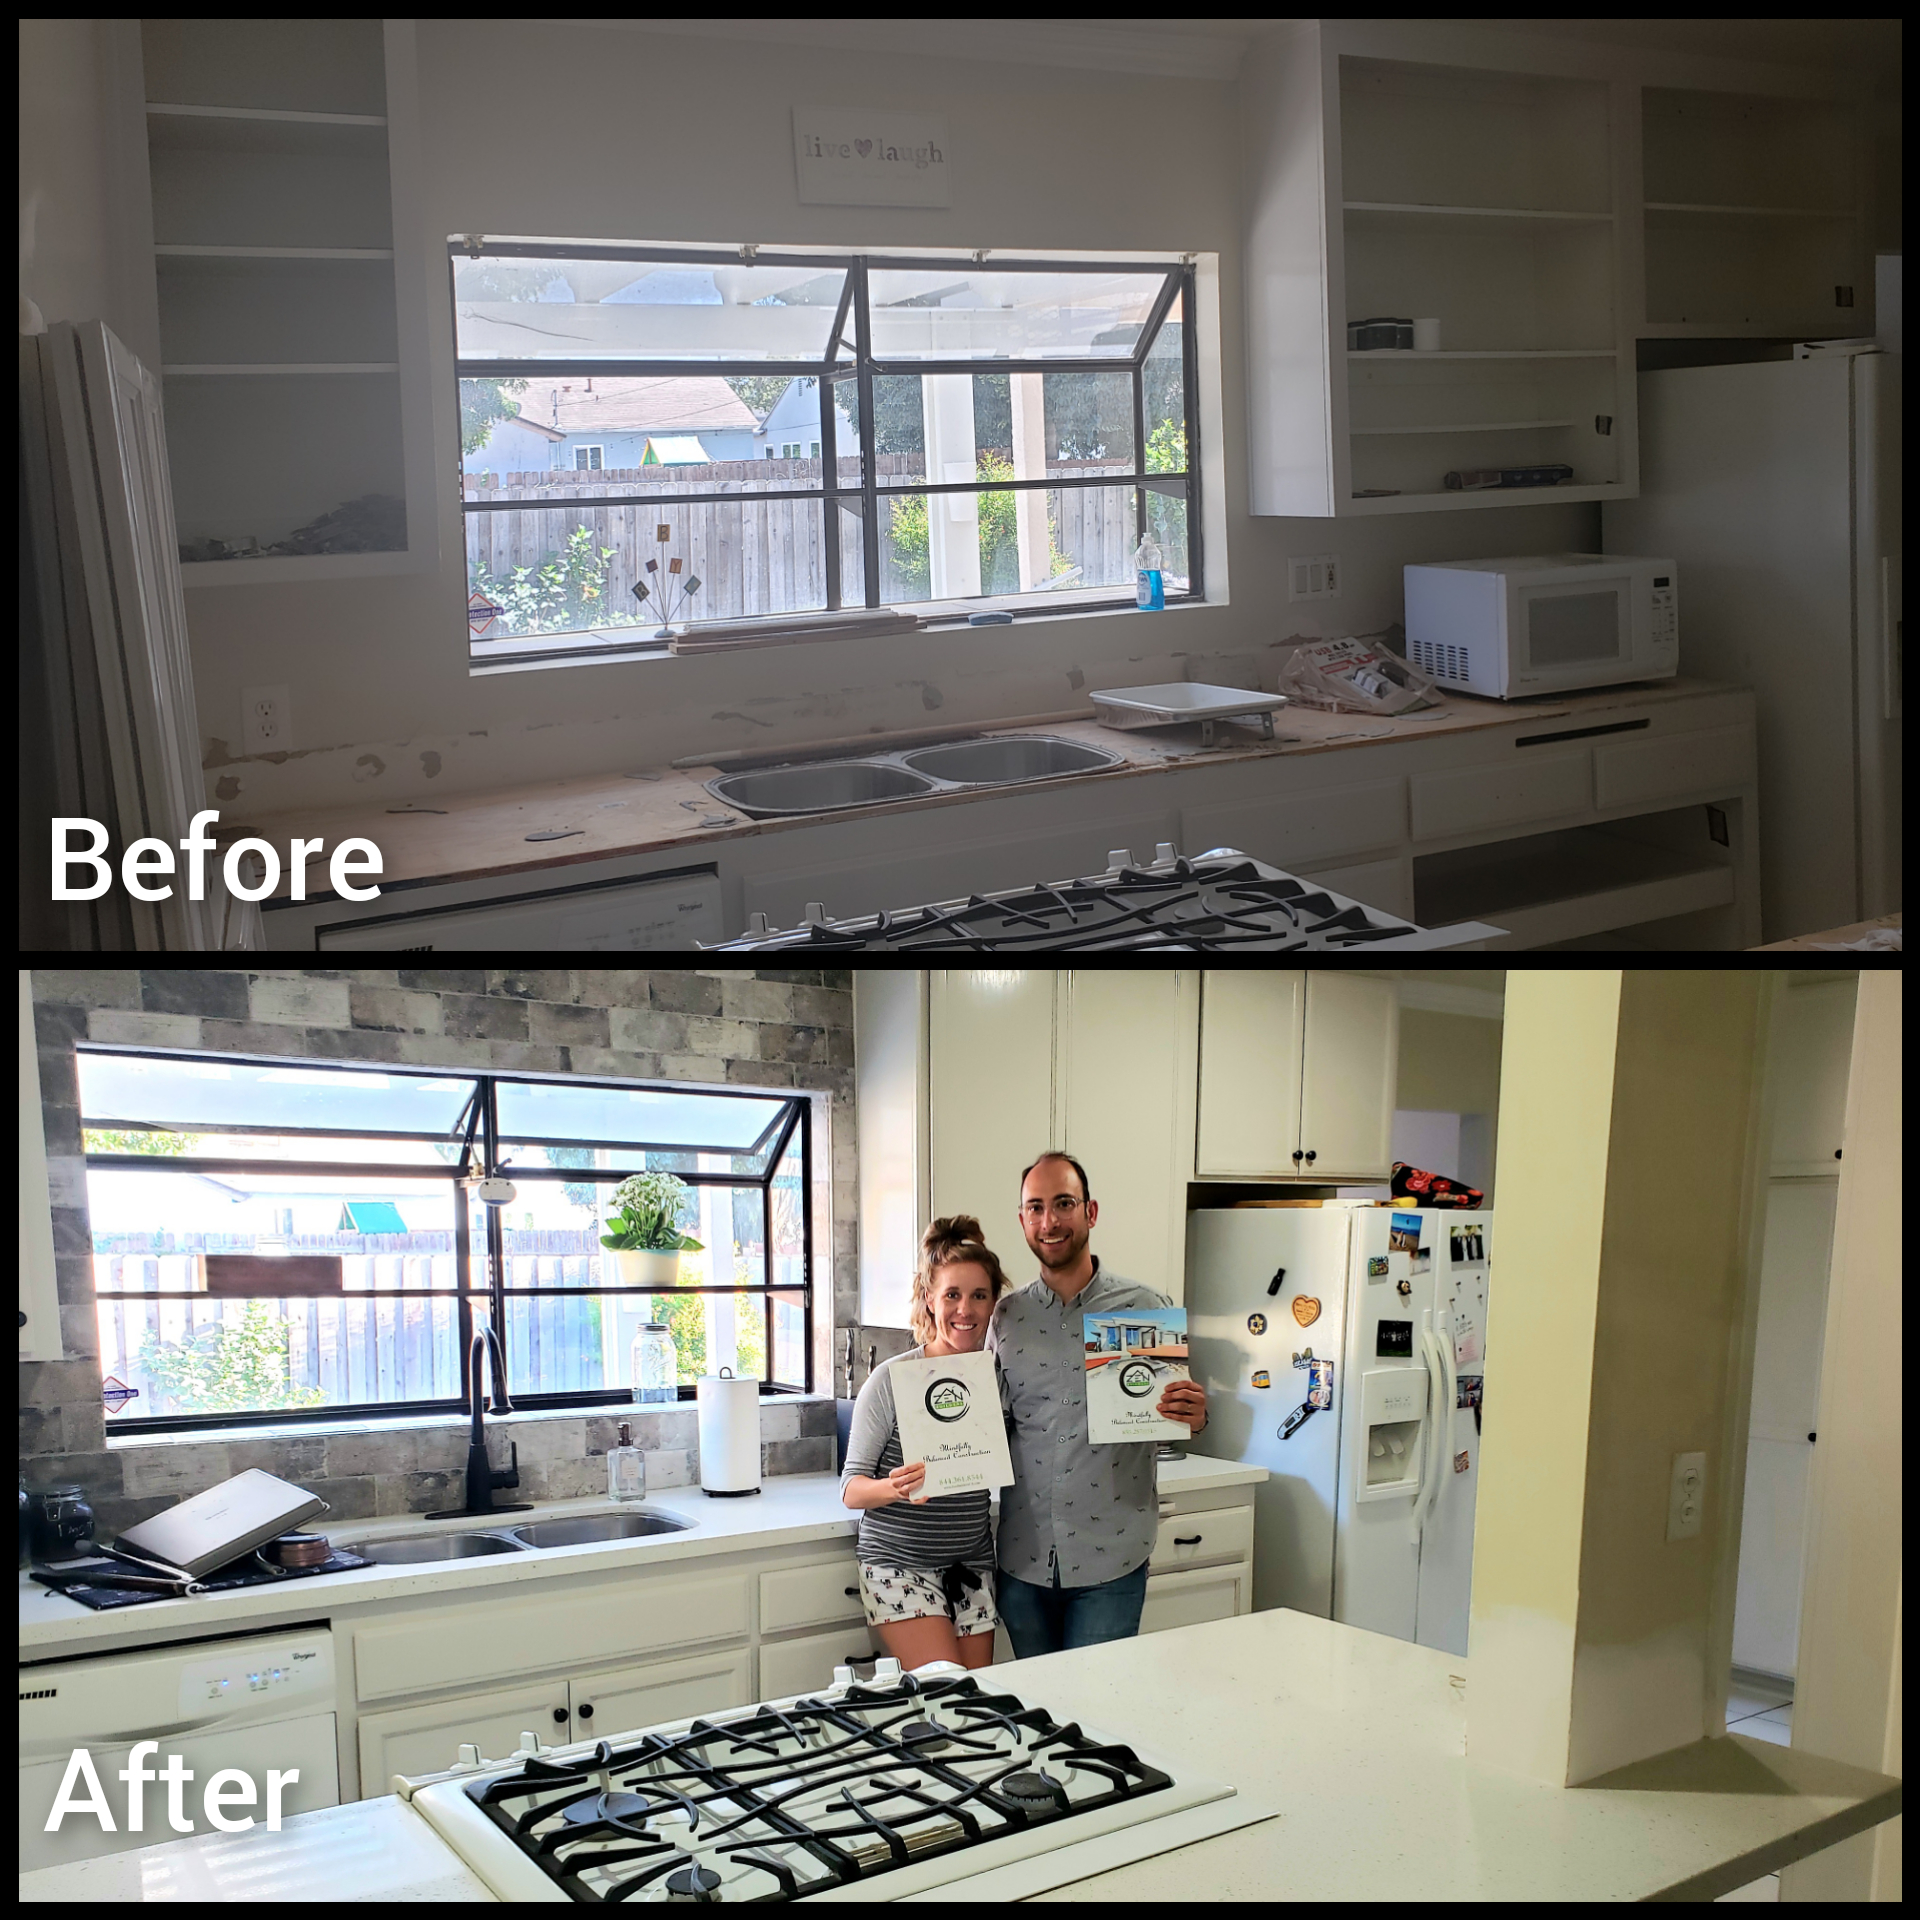 Before and after kitchen remodeling